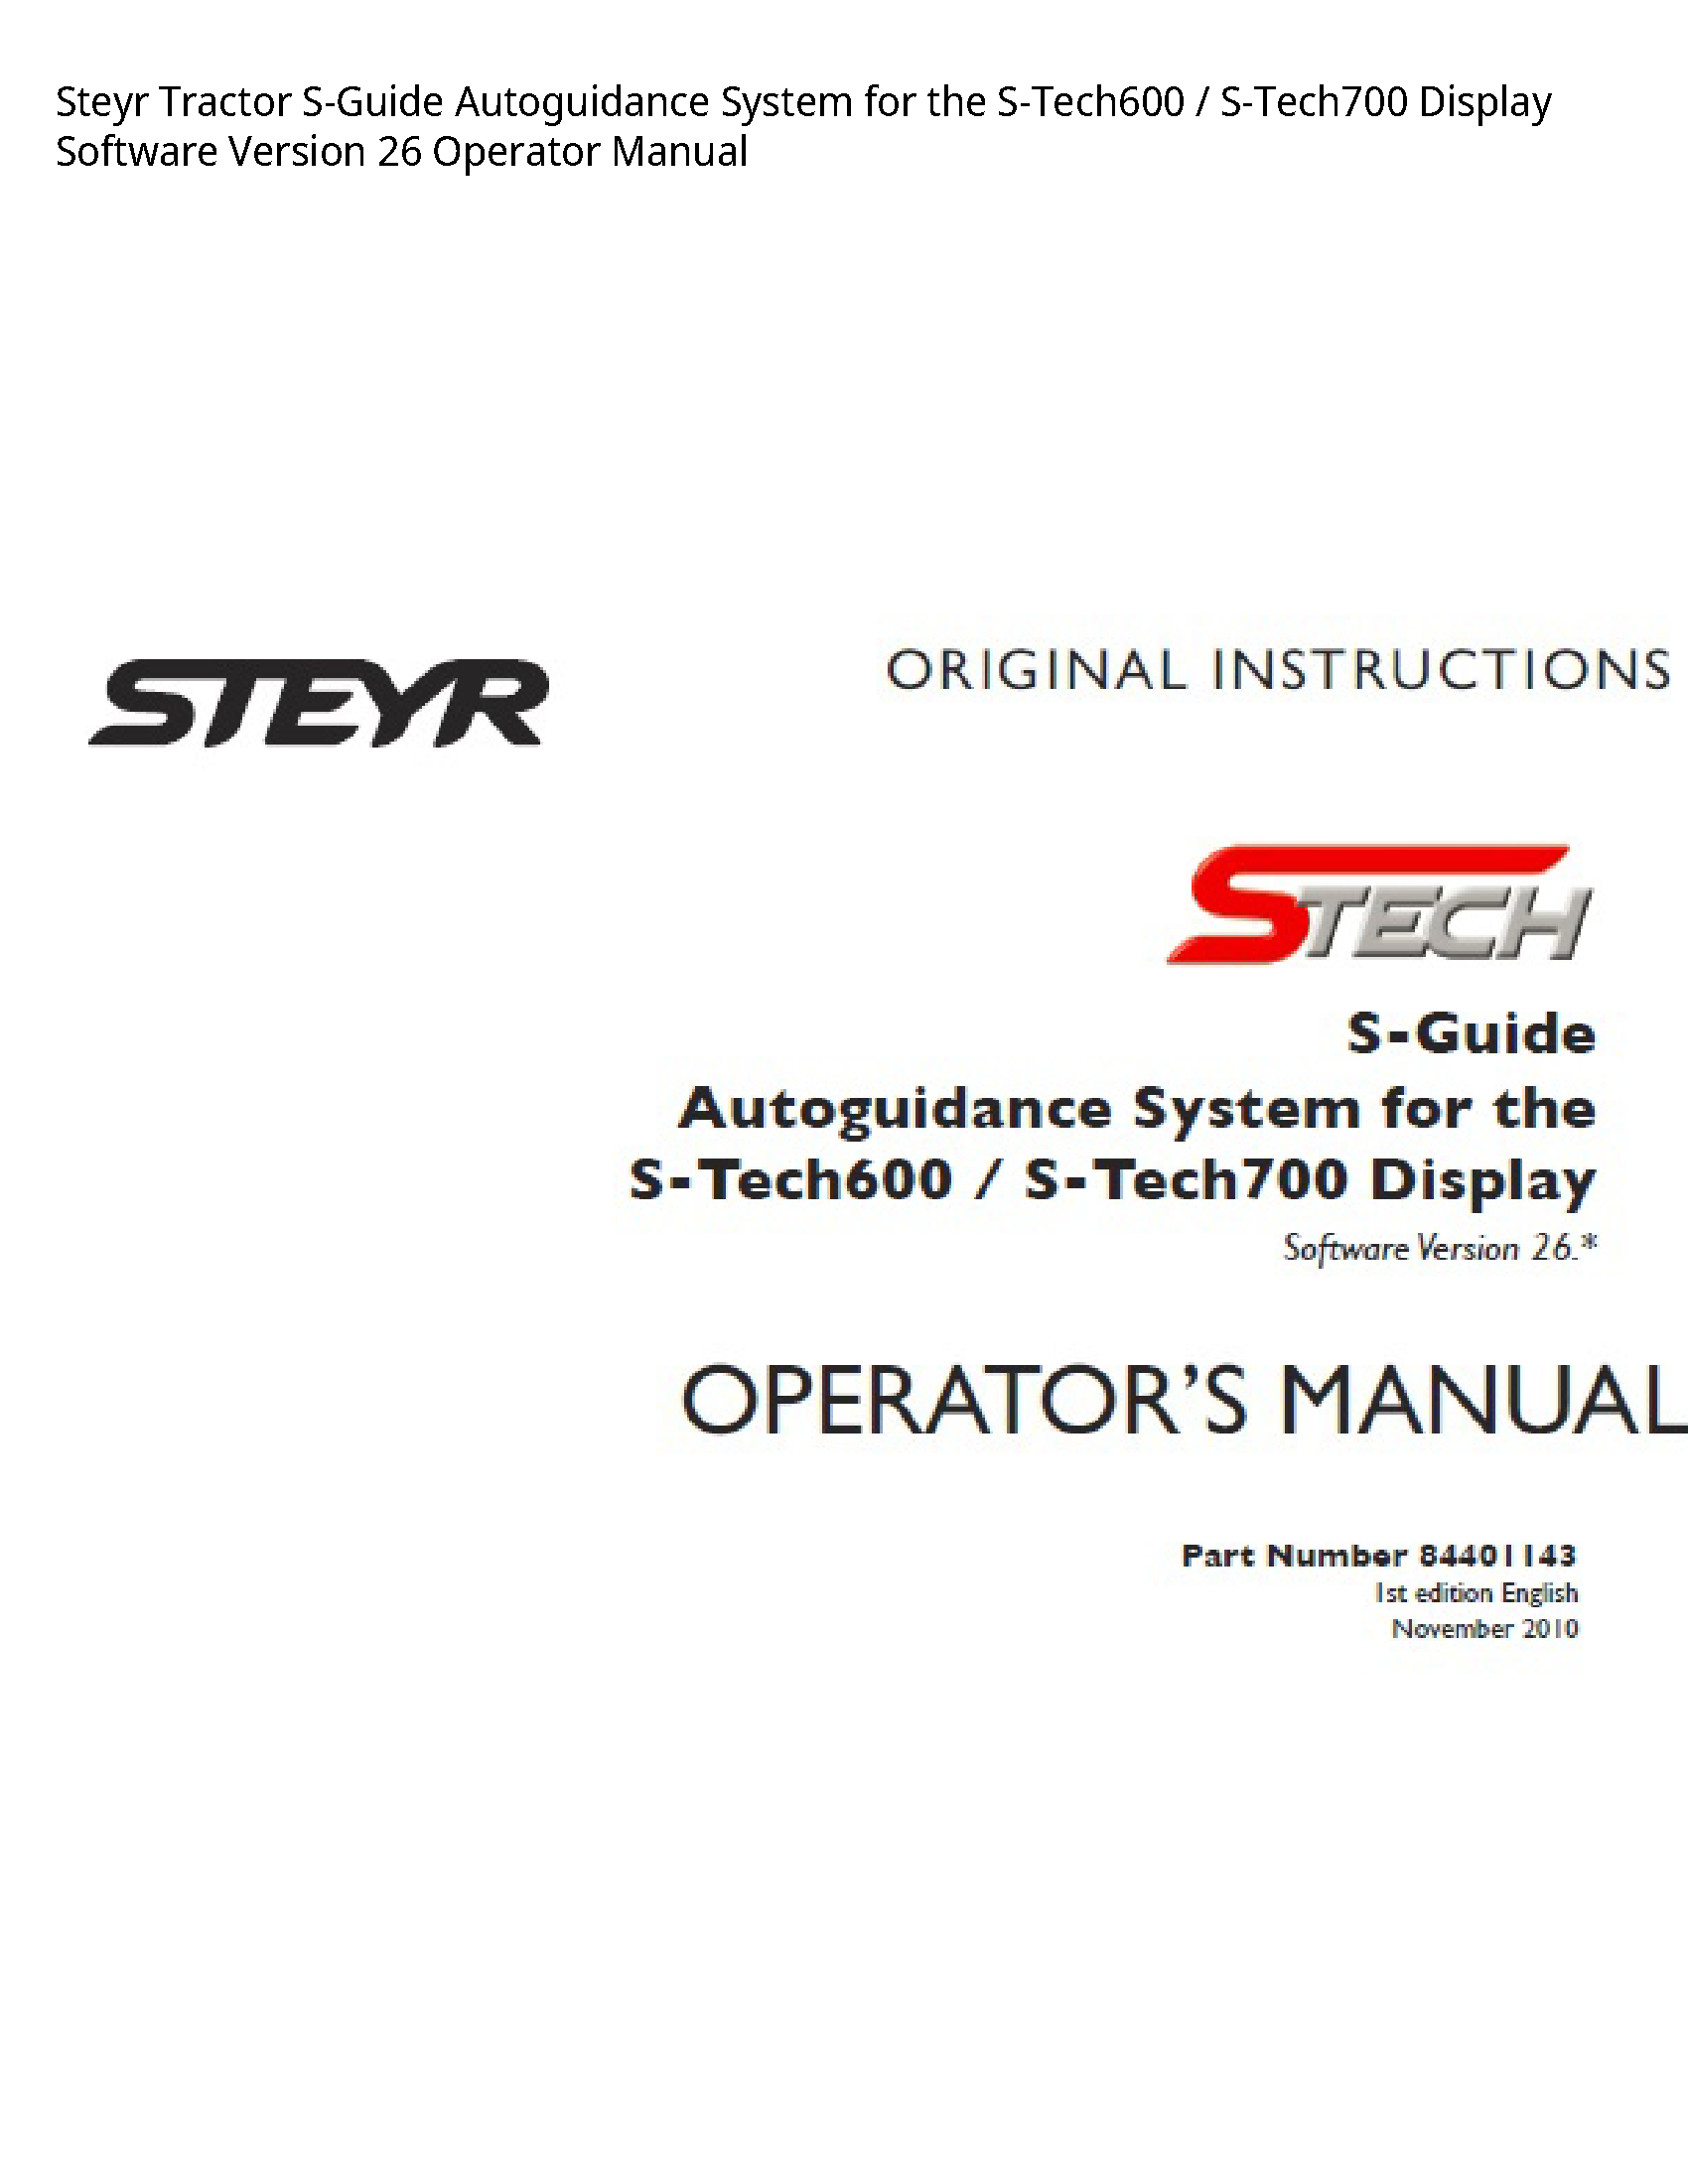 Steyr S-Tech600 Tractor S-Guide Autoguidance System for the Display Software Version Operator manual